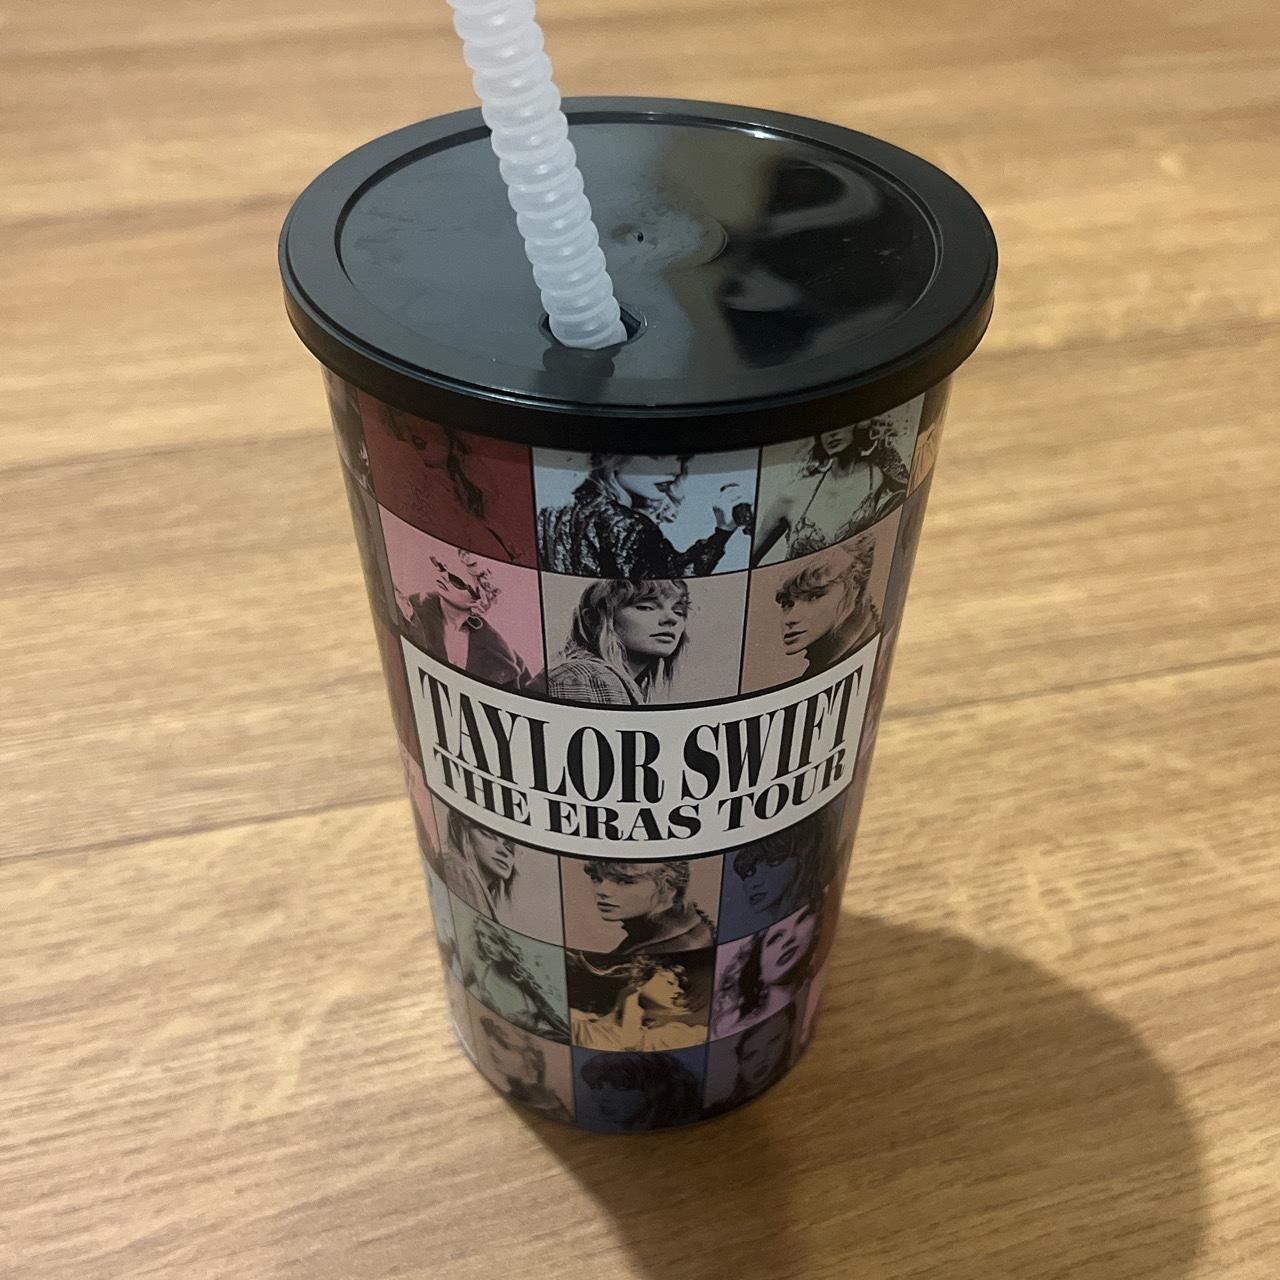 Taylor Swift Eras Tour cup Unused from... - Depop